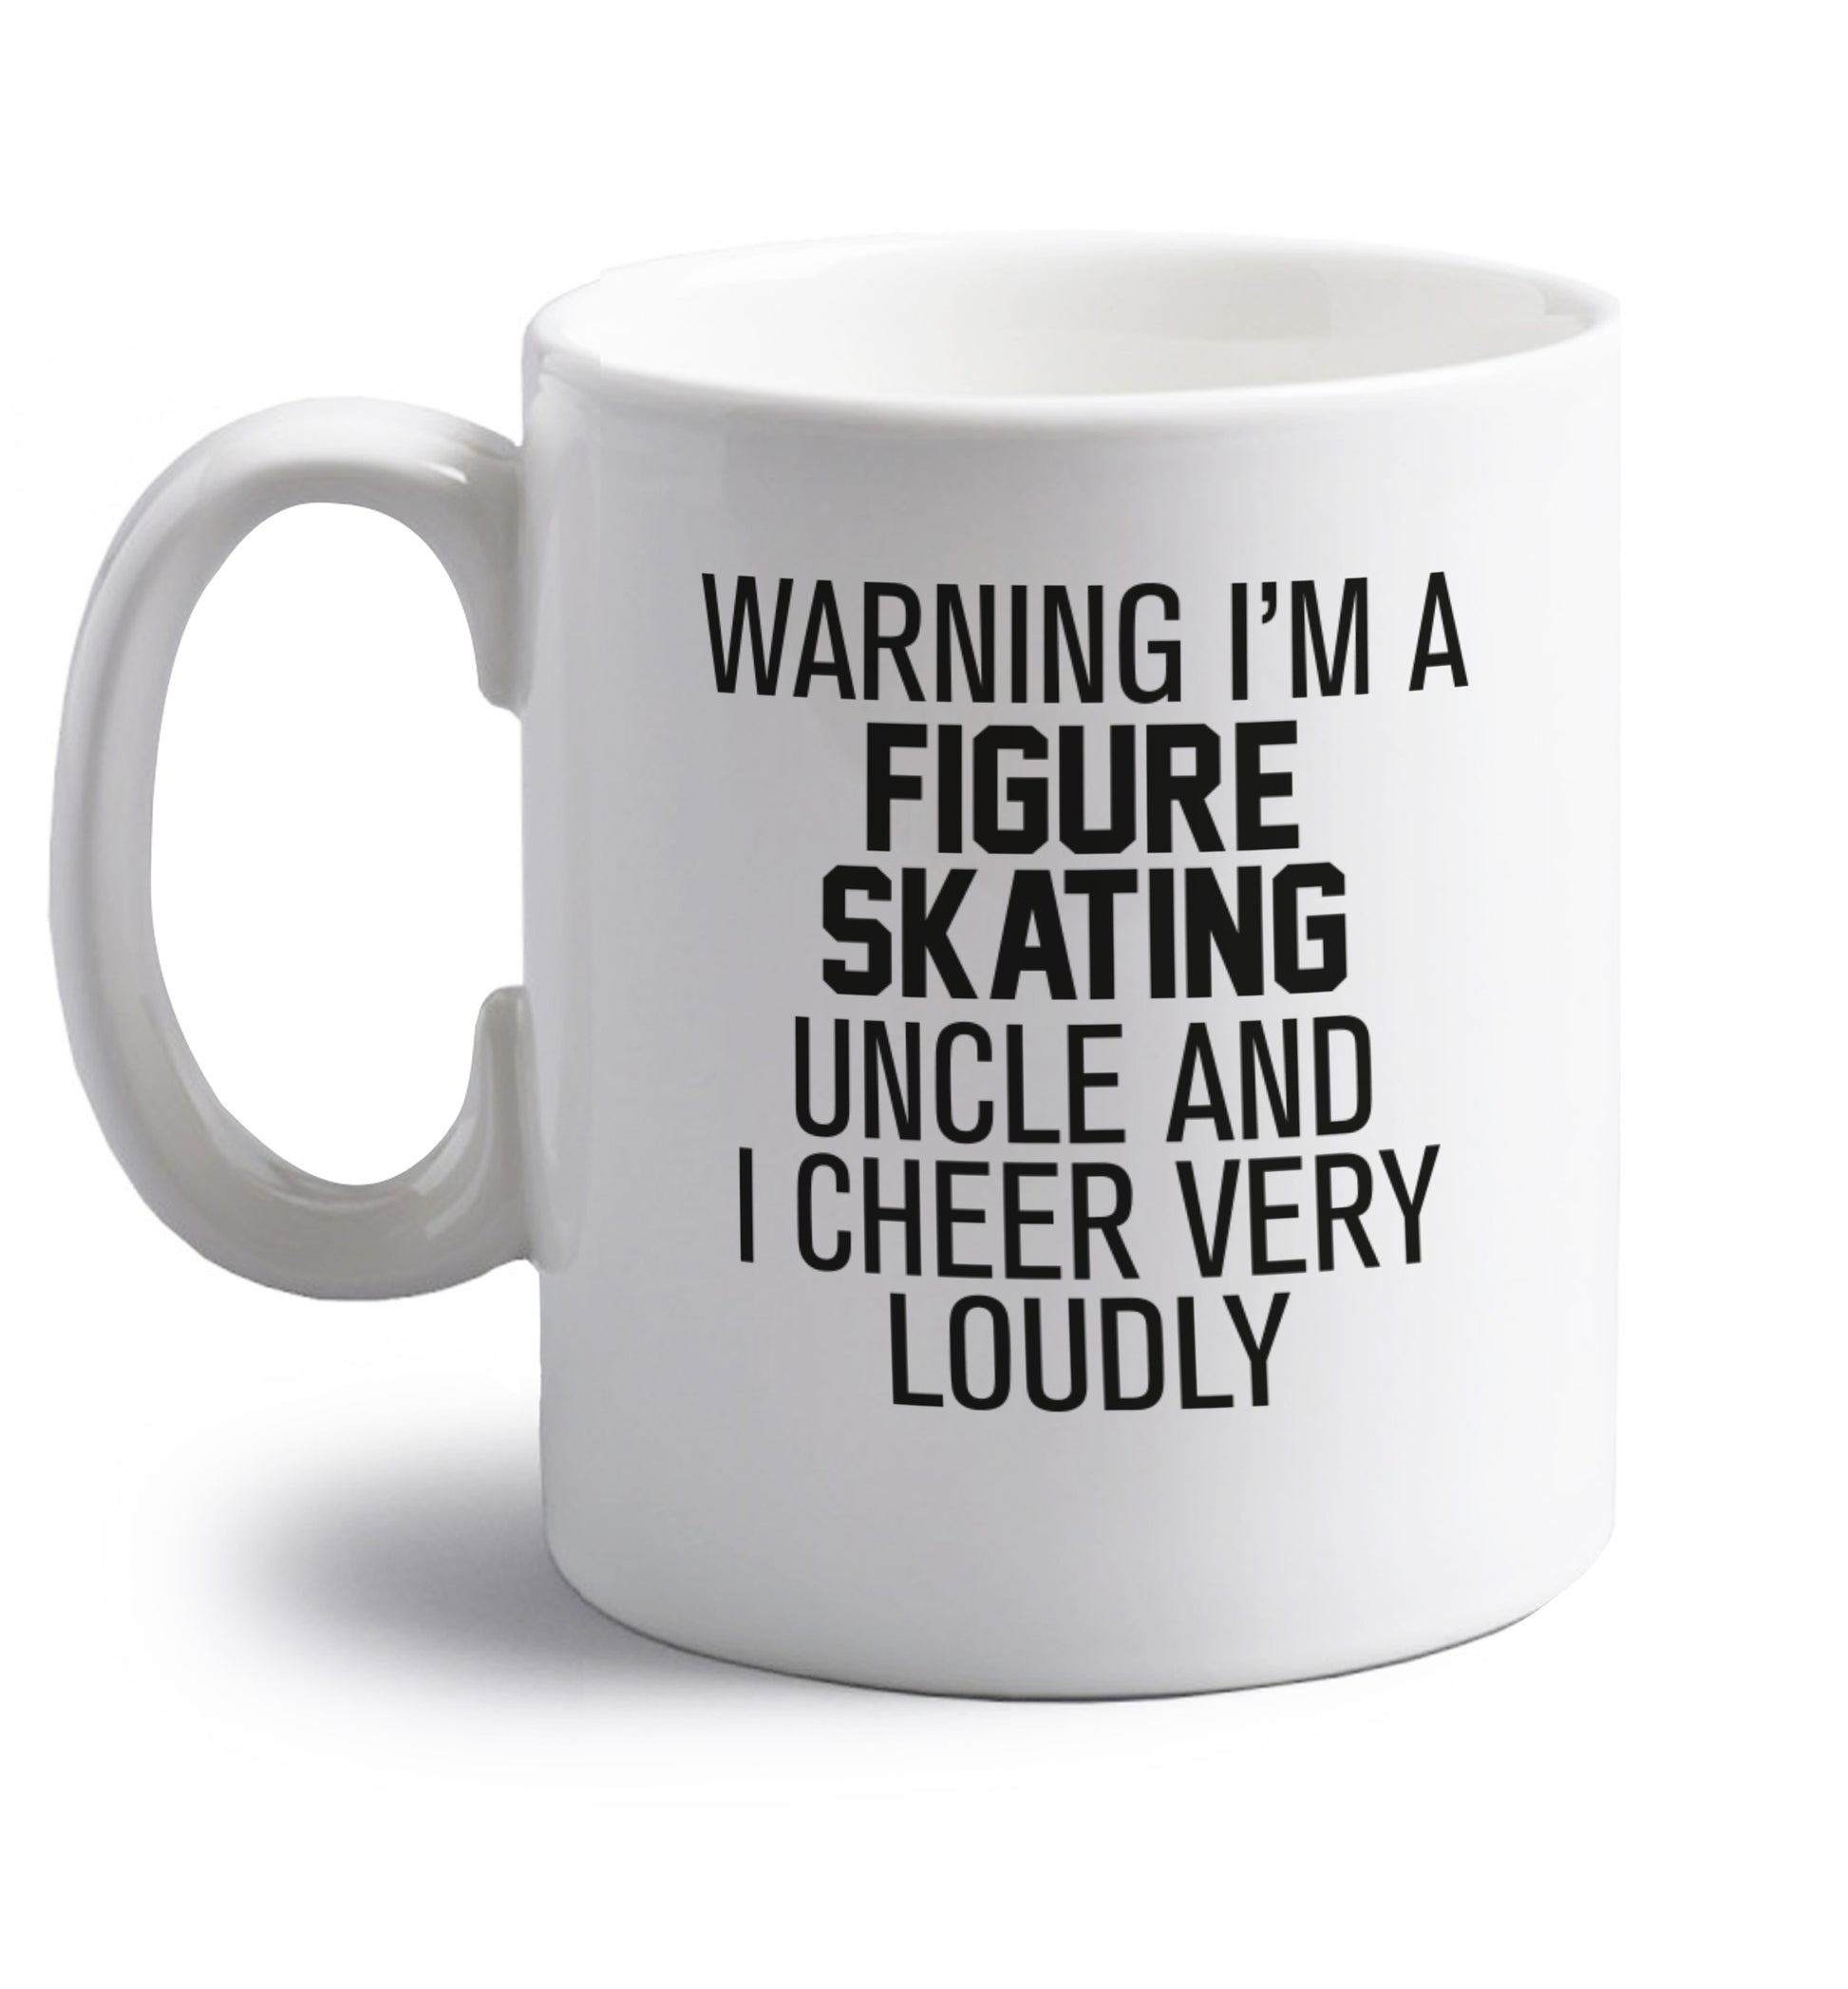 Warning I'm a figure skating uncle and I cheer very loudly right handed white ceramic mug 